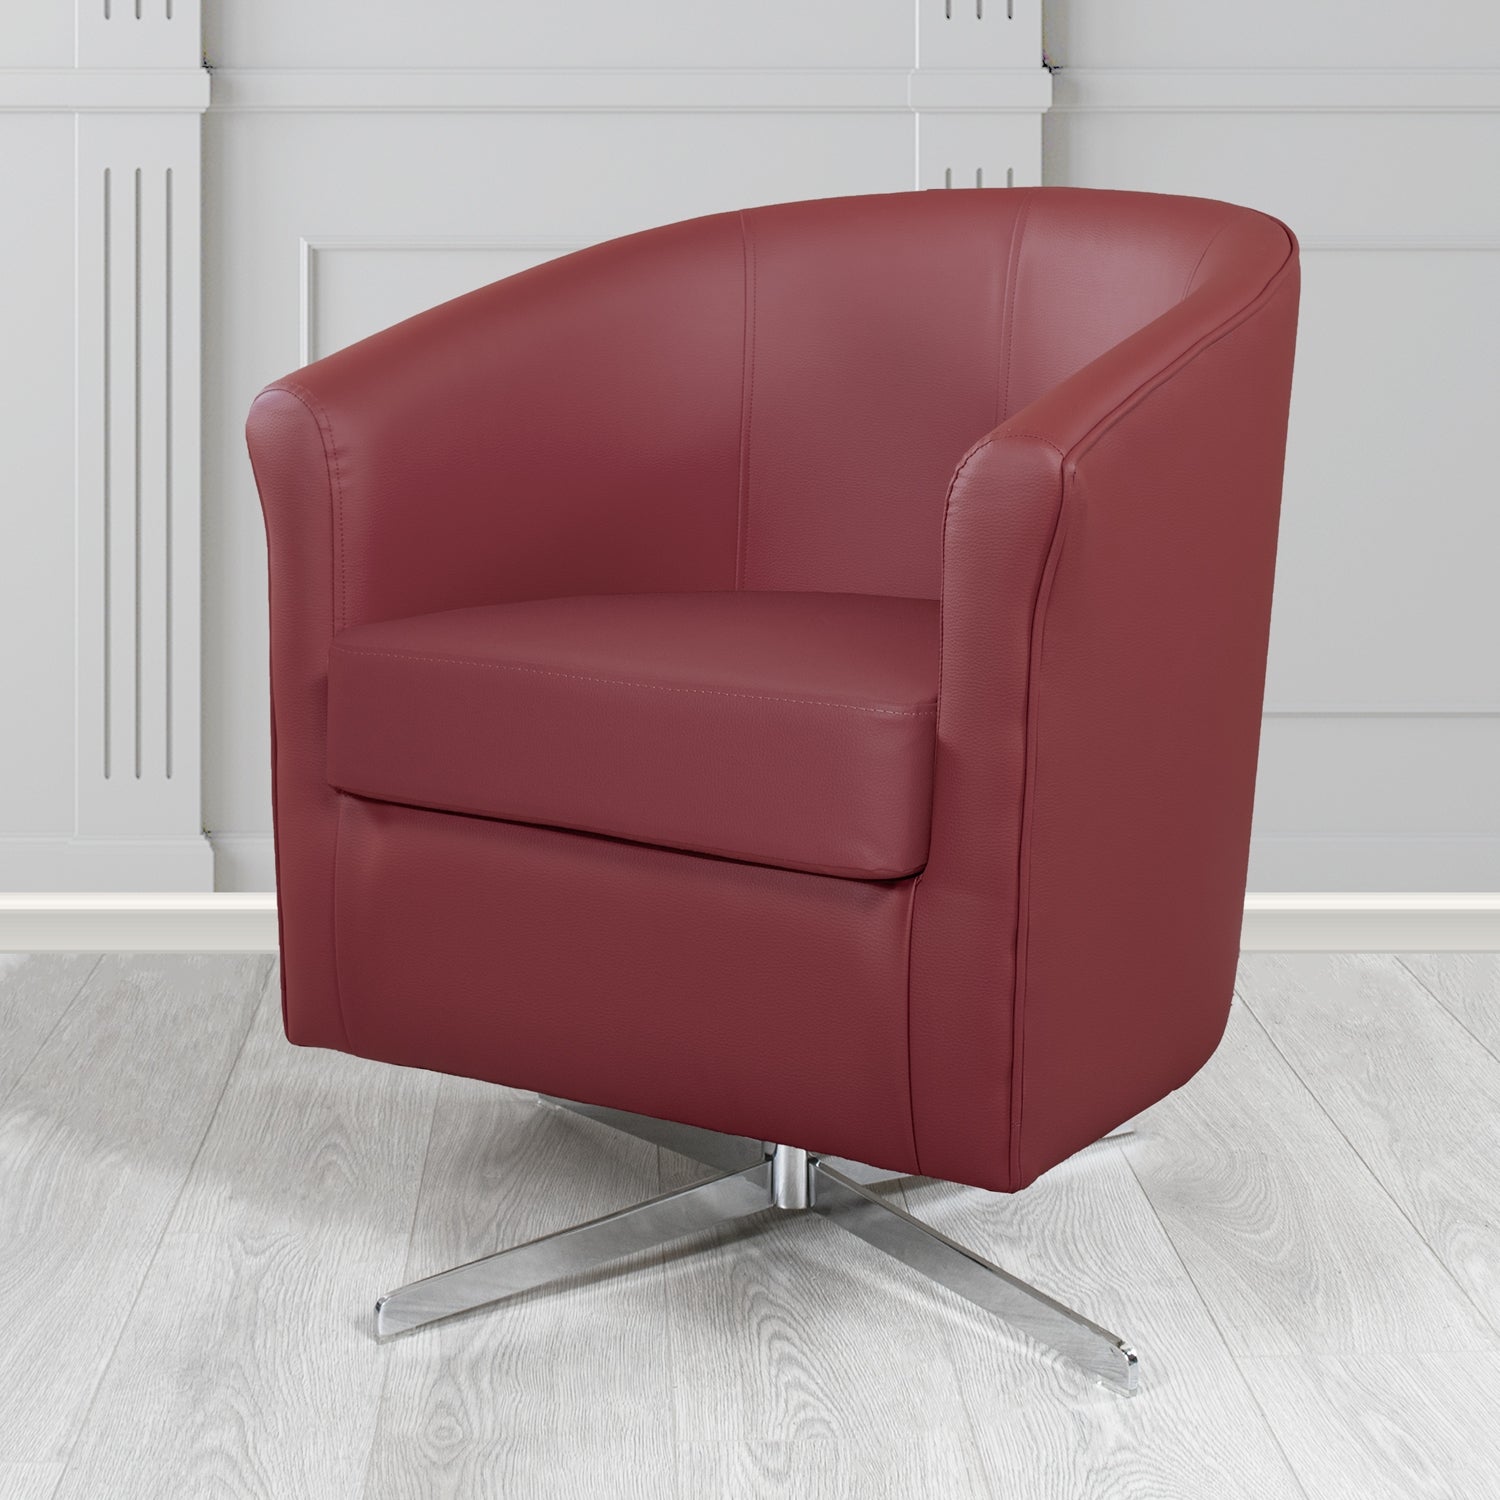 Cannes Swivel Tub Chair in Just Colour Mulled Wine Crib 5 Faux Leather - The Tub Chair Shop